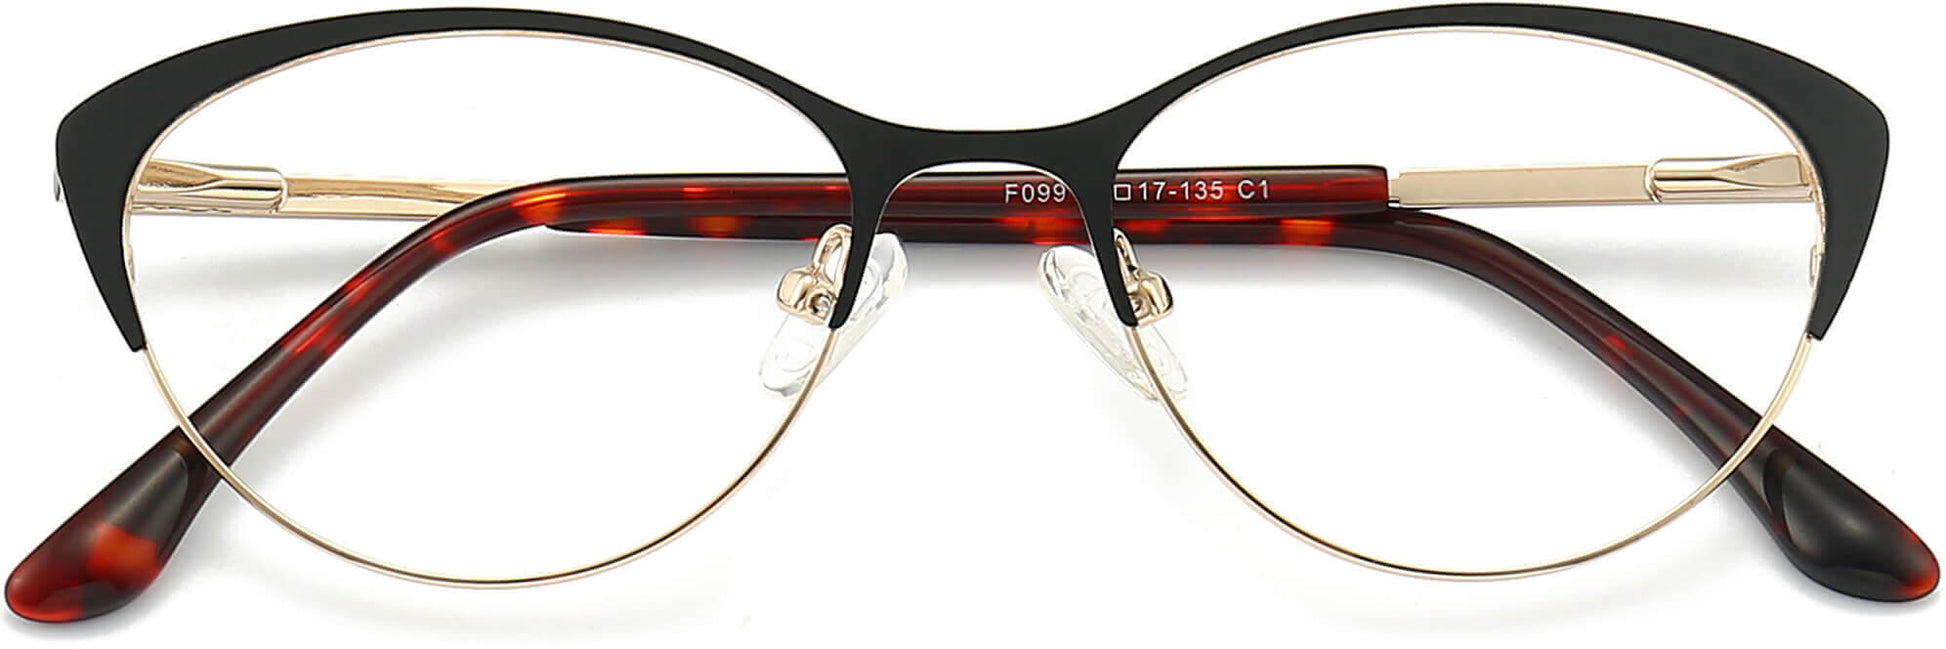 Maia Cateye Black Eyeglasses from ANRRI, closed view